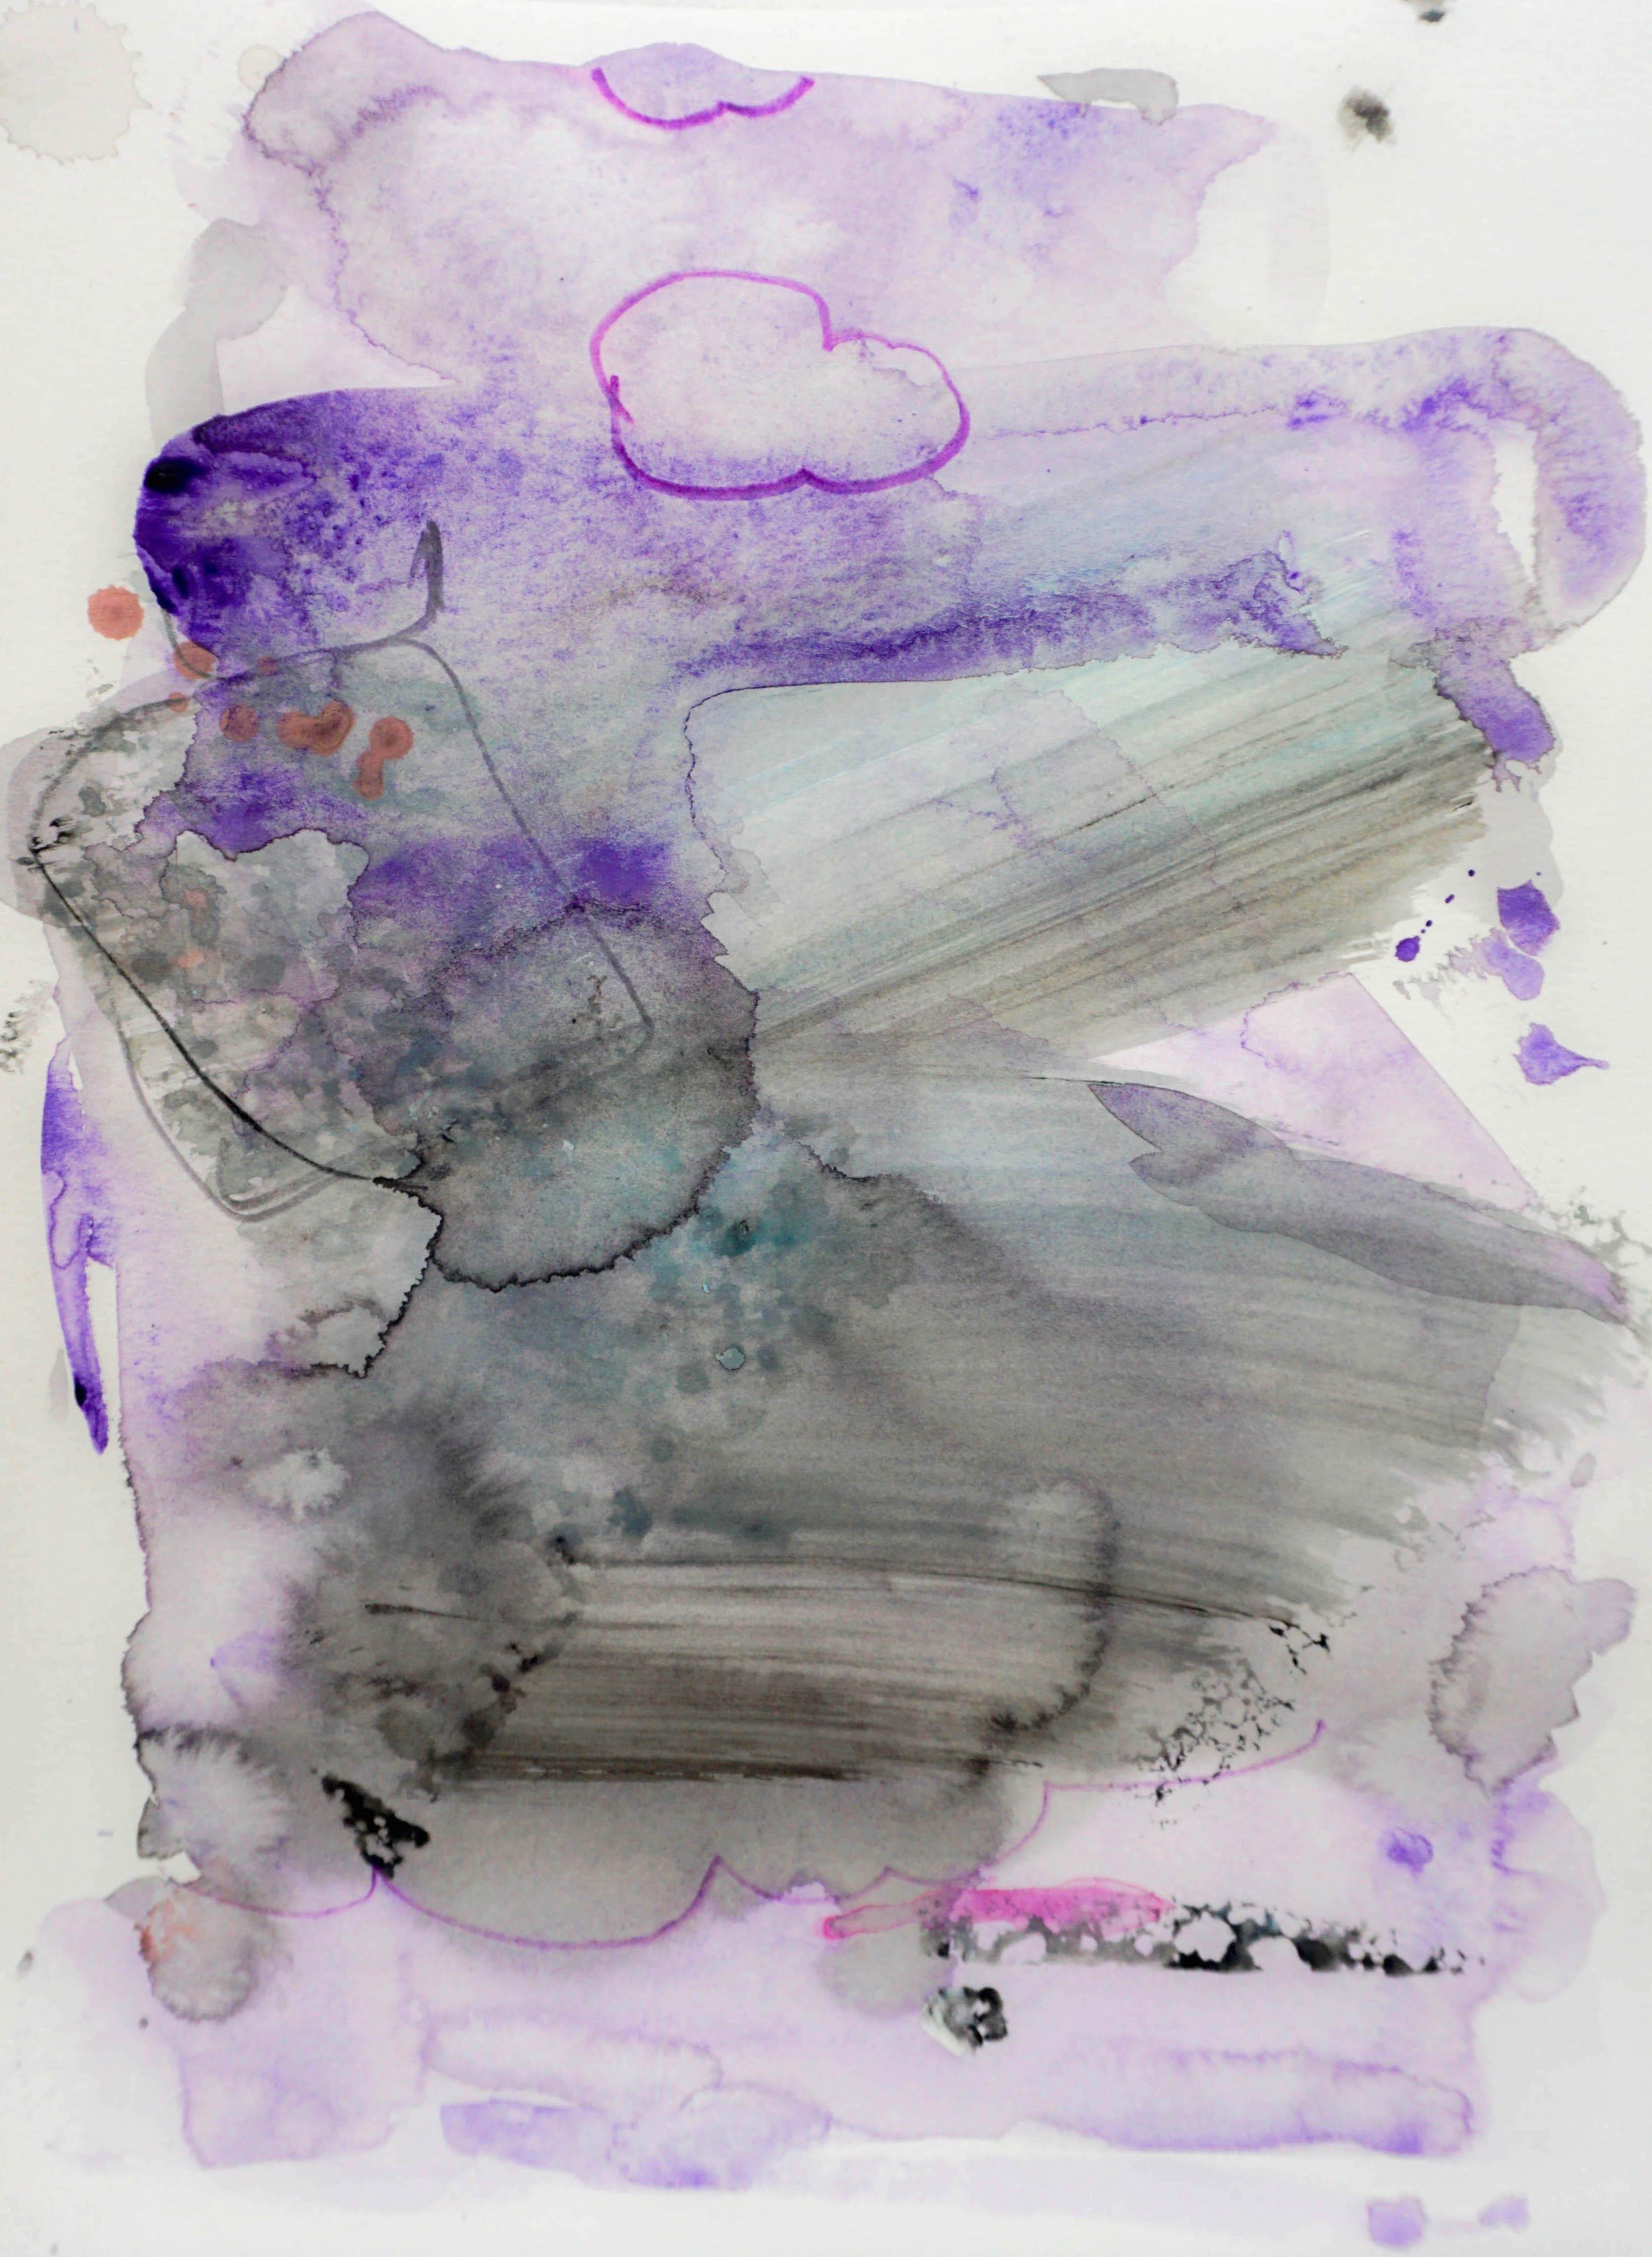 Sponge Effects, purple abstract watercolor painting on archival paper